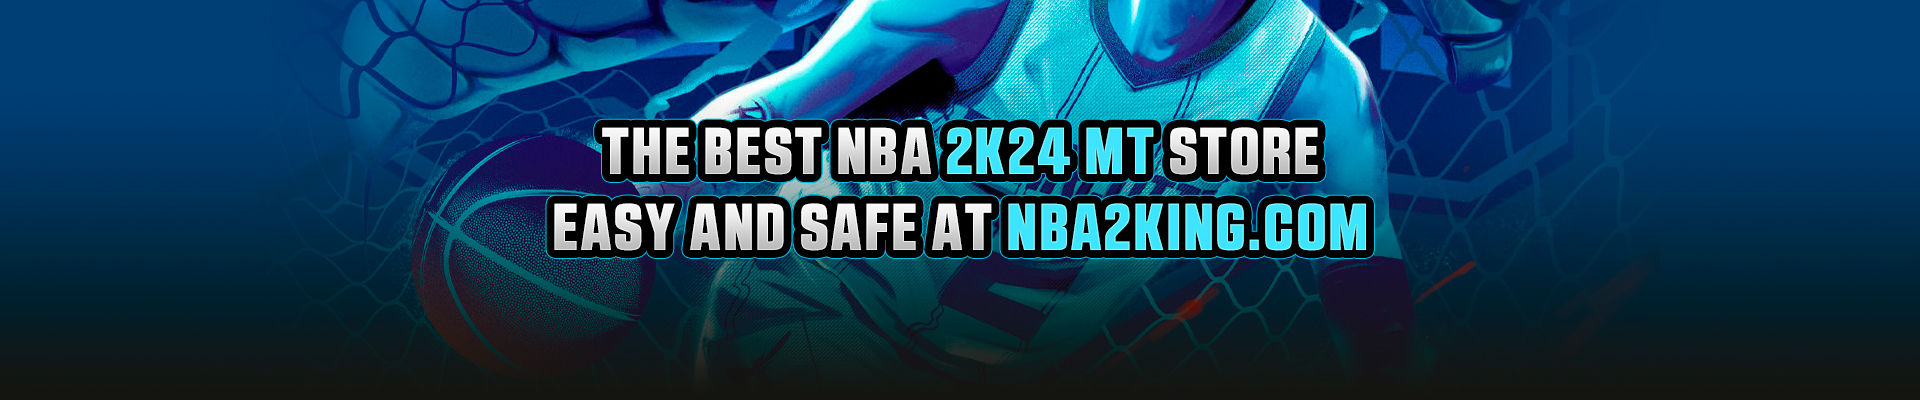 The Best NBA 2K24 MT Store, Easy And Safe At NBA2K